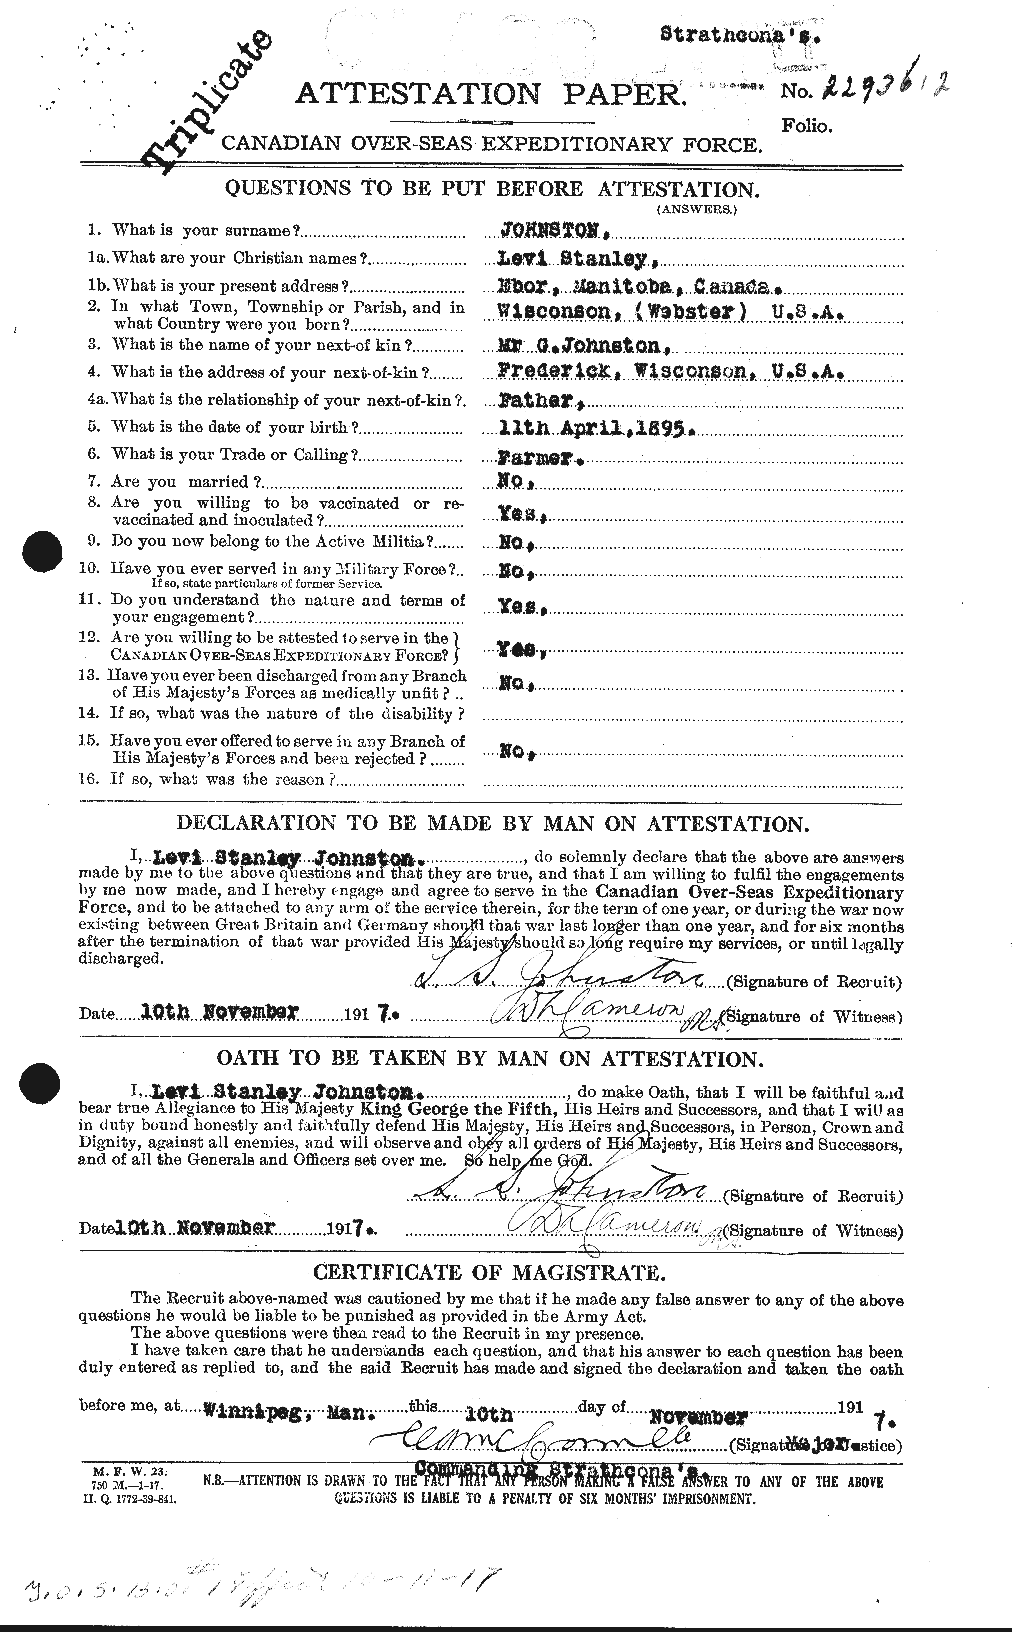 Personnel Records of the First World War - CEF 422950a